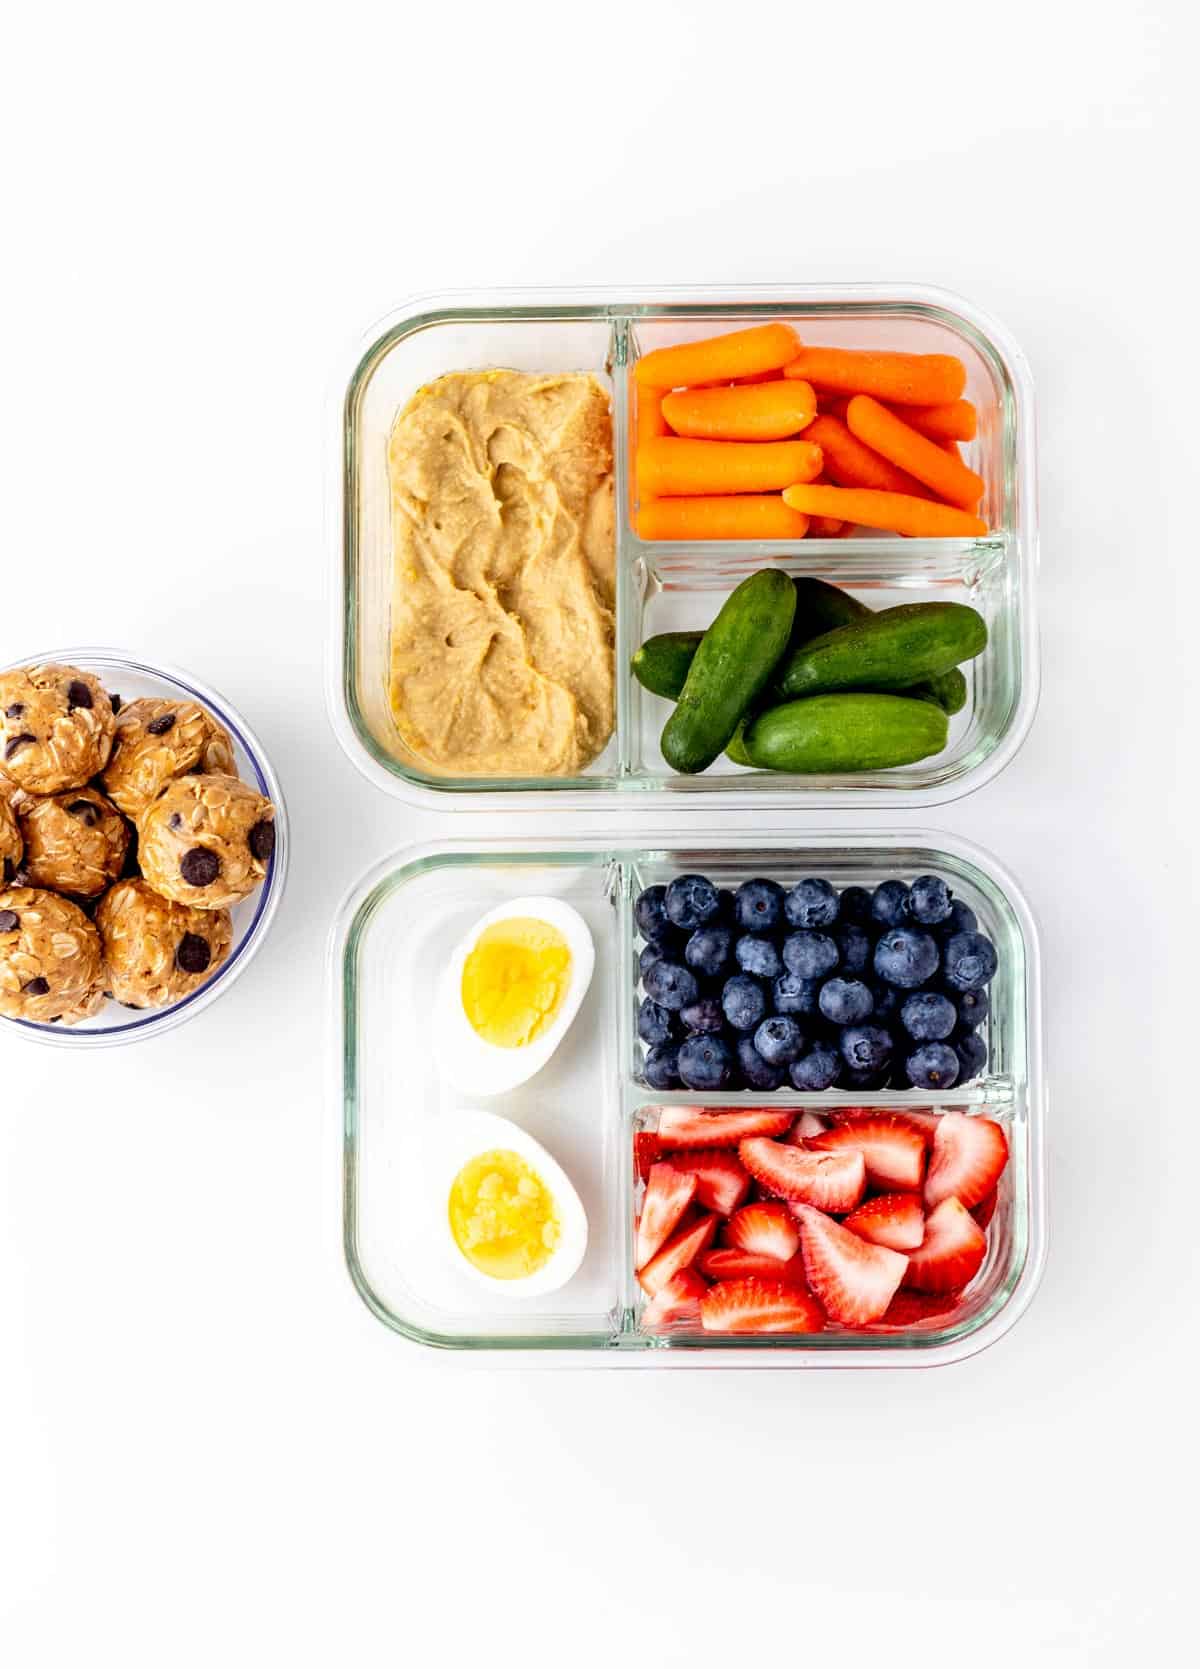 Healthy travel snacks including fruits, veggies, hummus, hard boiled eggs and energy balls packed in containers.